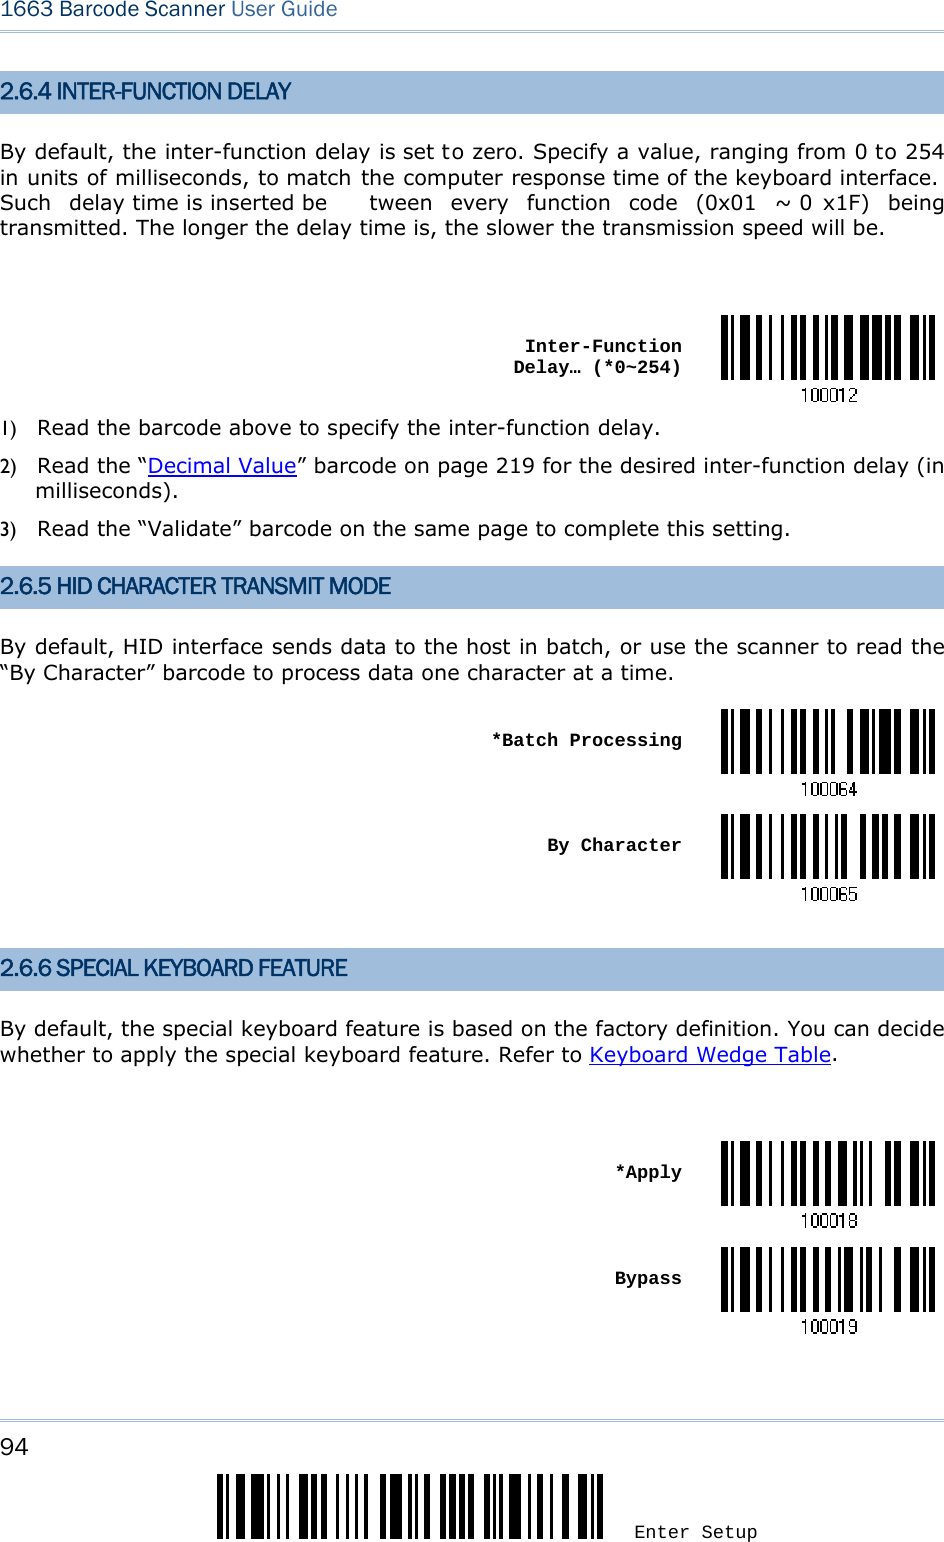 94 Enter Setup 1663 Barcode Scanner User Guide  2.6.4 INTER-FUNCTION DELAY By default, the inter-function delay is set to zero. Specify a value, ranging from 0 to 254 in units of milliseconds, to match the computer response time of the keyboard interface.  Such delay time is inserted be tween every function code (0x01 ~ 0 x1F) being transmitted. The longer the delay time is, the slower the transmission speed will be.   Inter-Function Delay… (*0~254)1) Read the barcode above to specify the inter-function delay.       2) Read the “Decimal Value” barcode on page 219 for the desired inter-function delay (in milliseconds).  3) Read the “Validate” barcode on the same page to complete this setting. 2.6.5 HID CHARACTER TRANSMIT MODE By default, HID interface sends data to the host in batch, or use the scanner to read the “By Character” barcode to process data one character at a time.  *Batch Processing By Character 2.6.6 SPECIAL KEYBOARD FEATURE By default, the special keyboard feature is based on the factory definition. You can decide whether to apply the special keyboard feature. Refer to Keyboard Wedge Table.   *Apply Bypass    